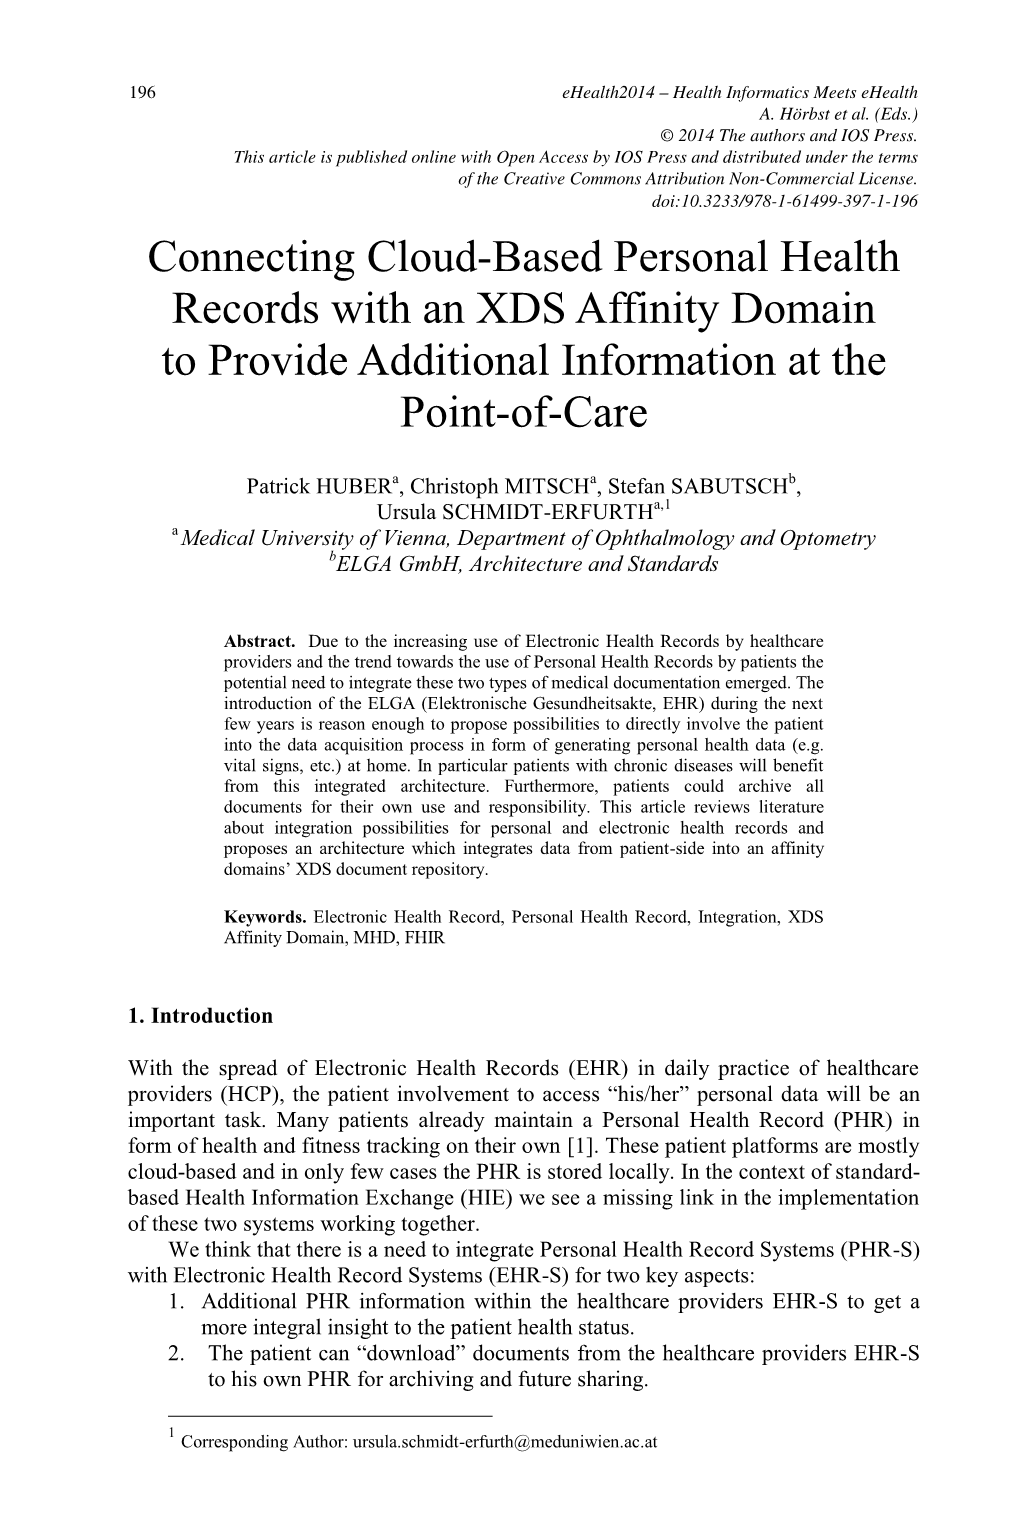 Connecting Cloud-Based Personal Health Records with an XDS Affinity Domain to Provide Additional Information at the Point-Of-Care